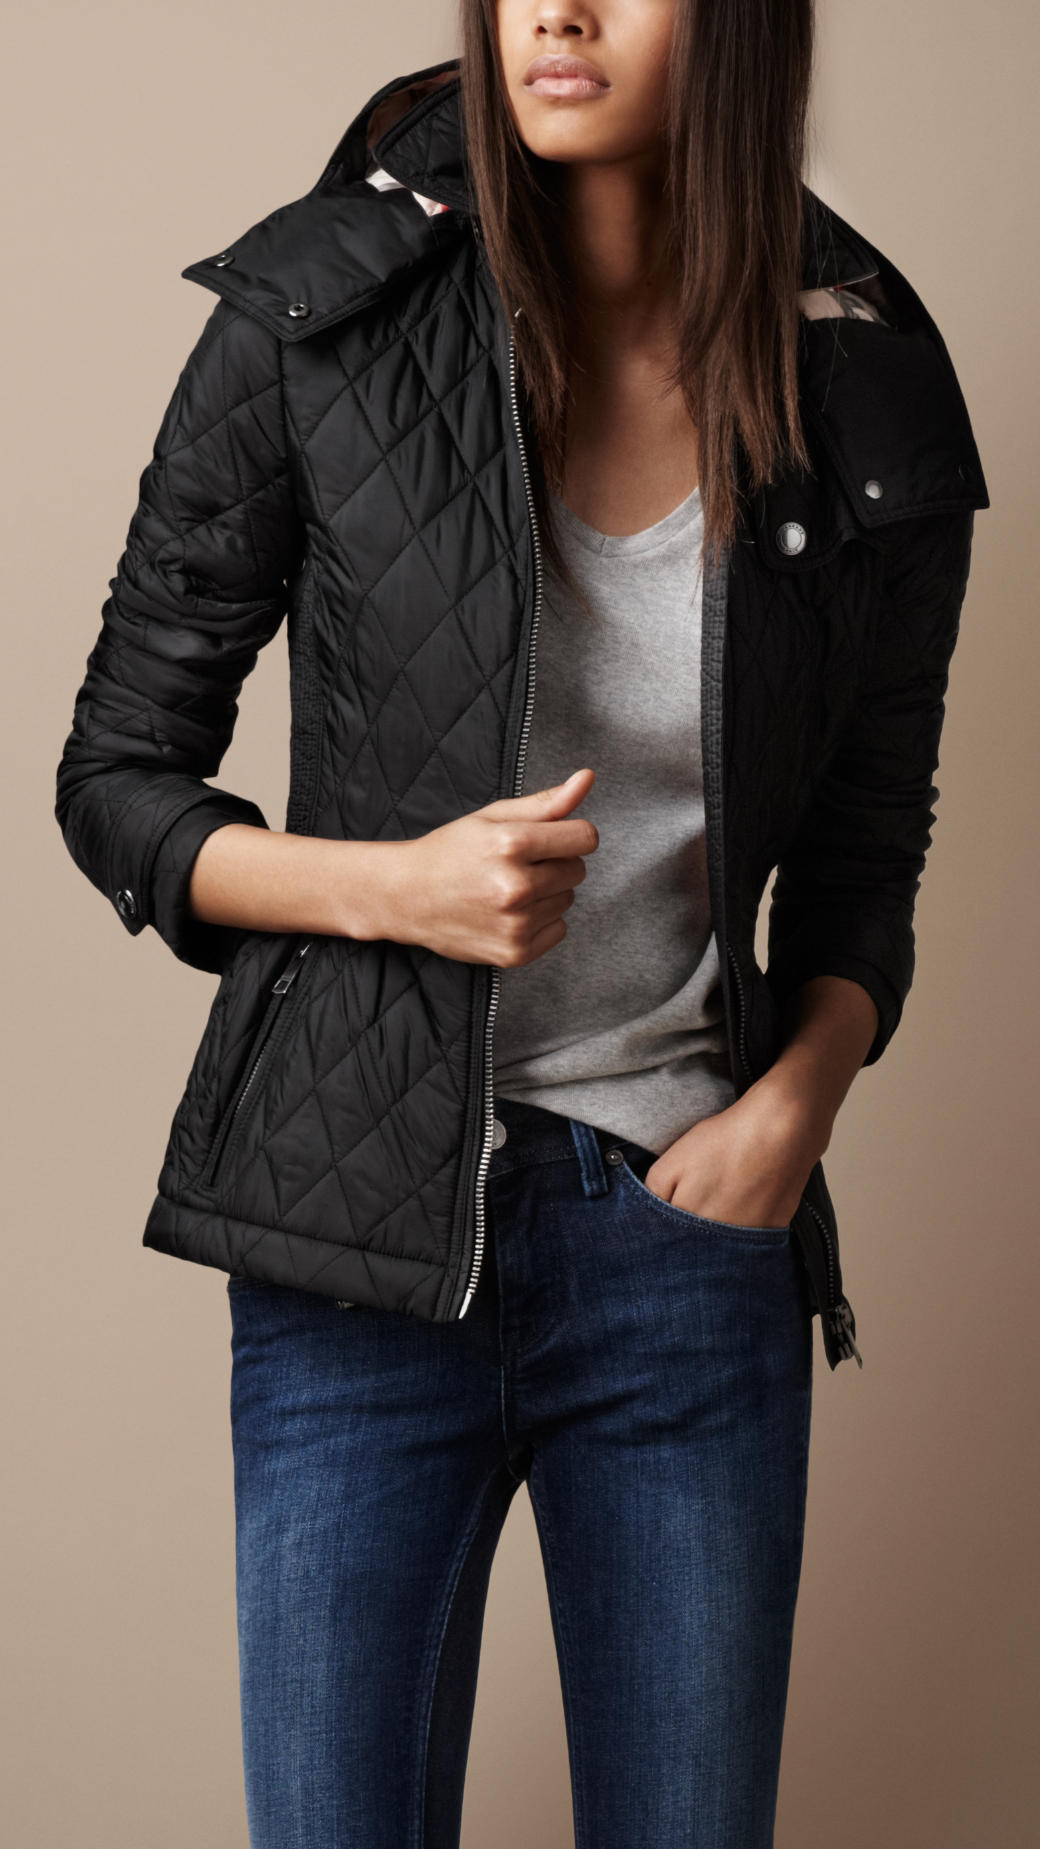 Lyst - Burberry Brit Hooded Quilted Jacket in Black